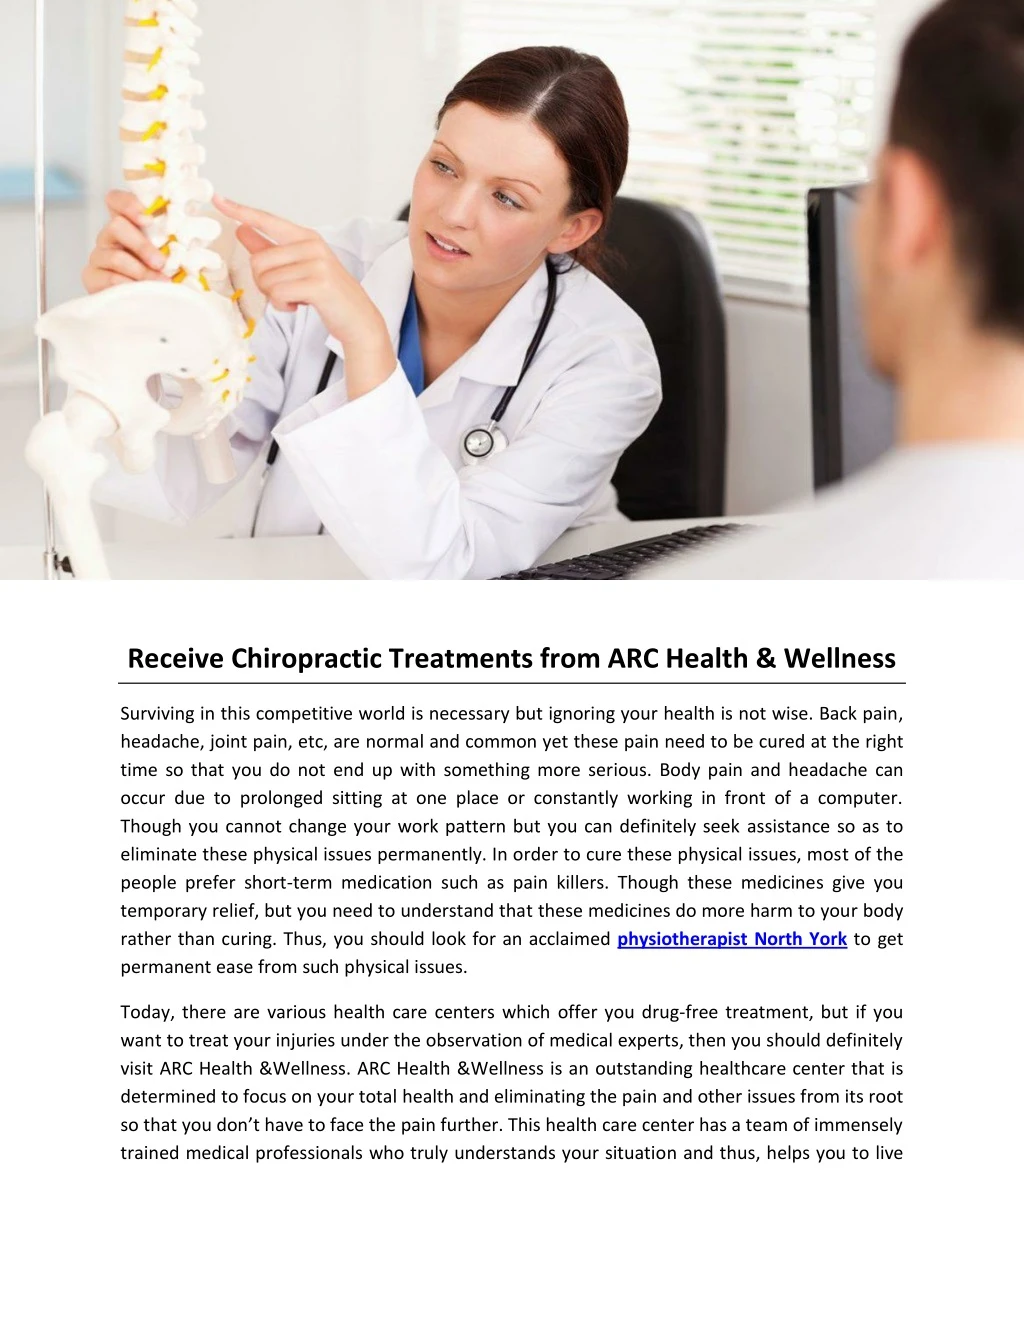 receive chiropractic treatments from arc health